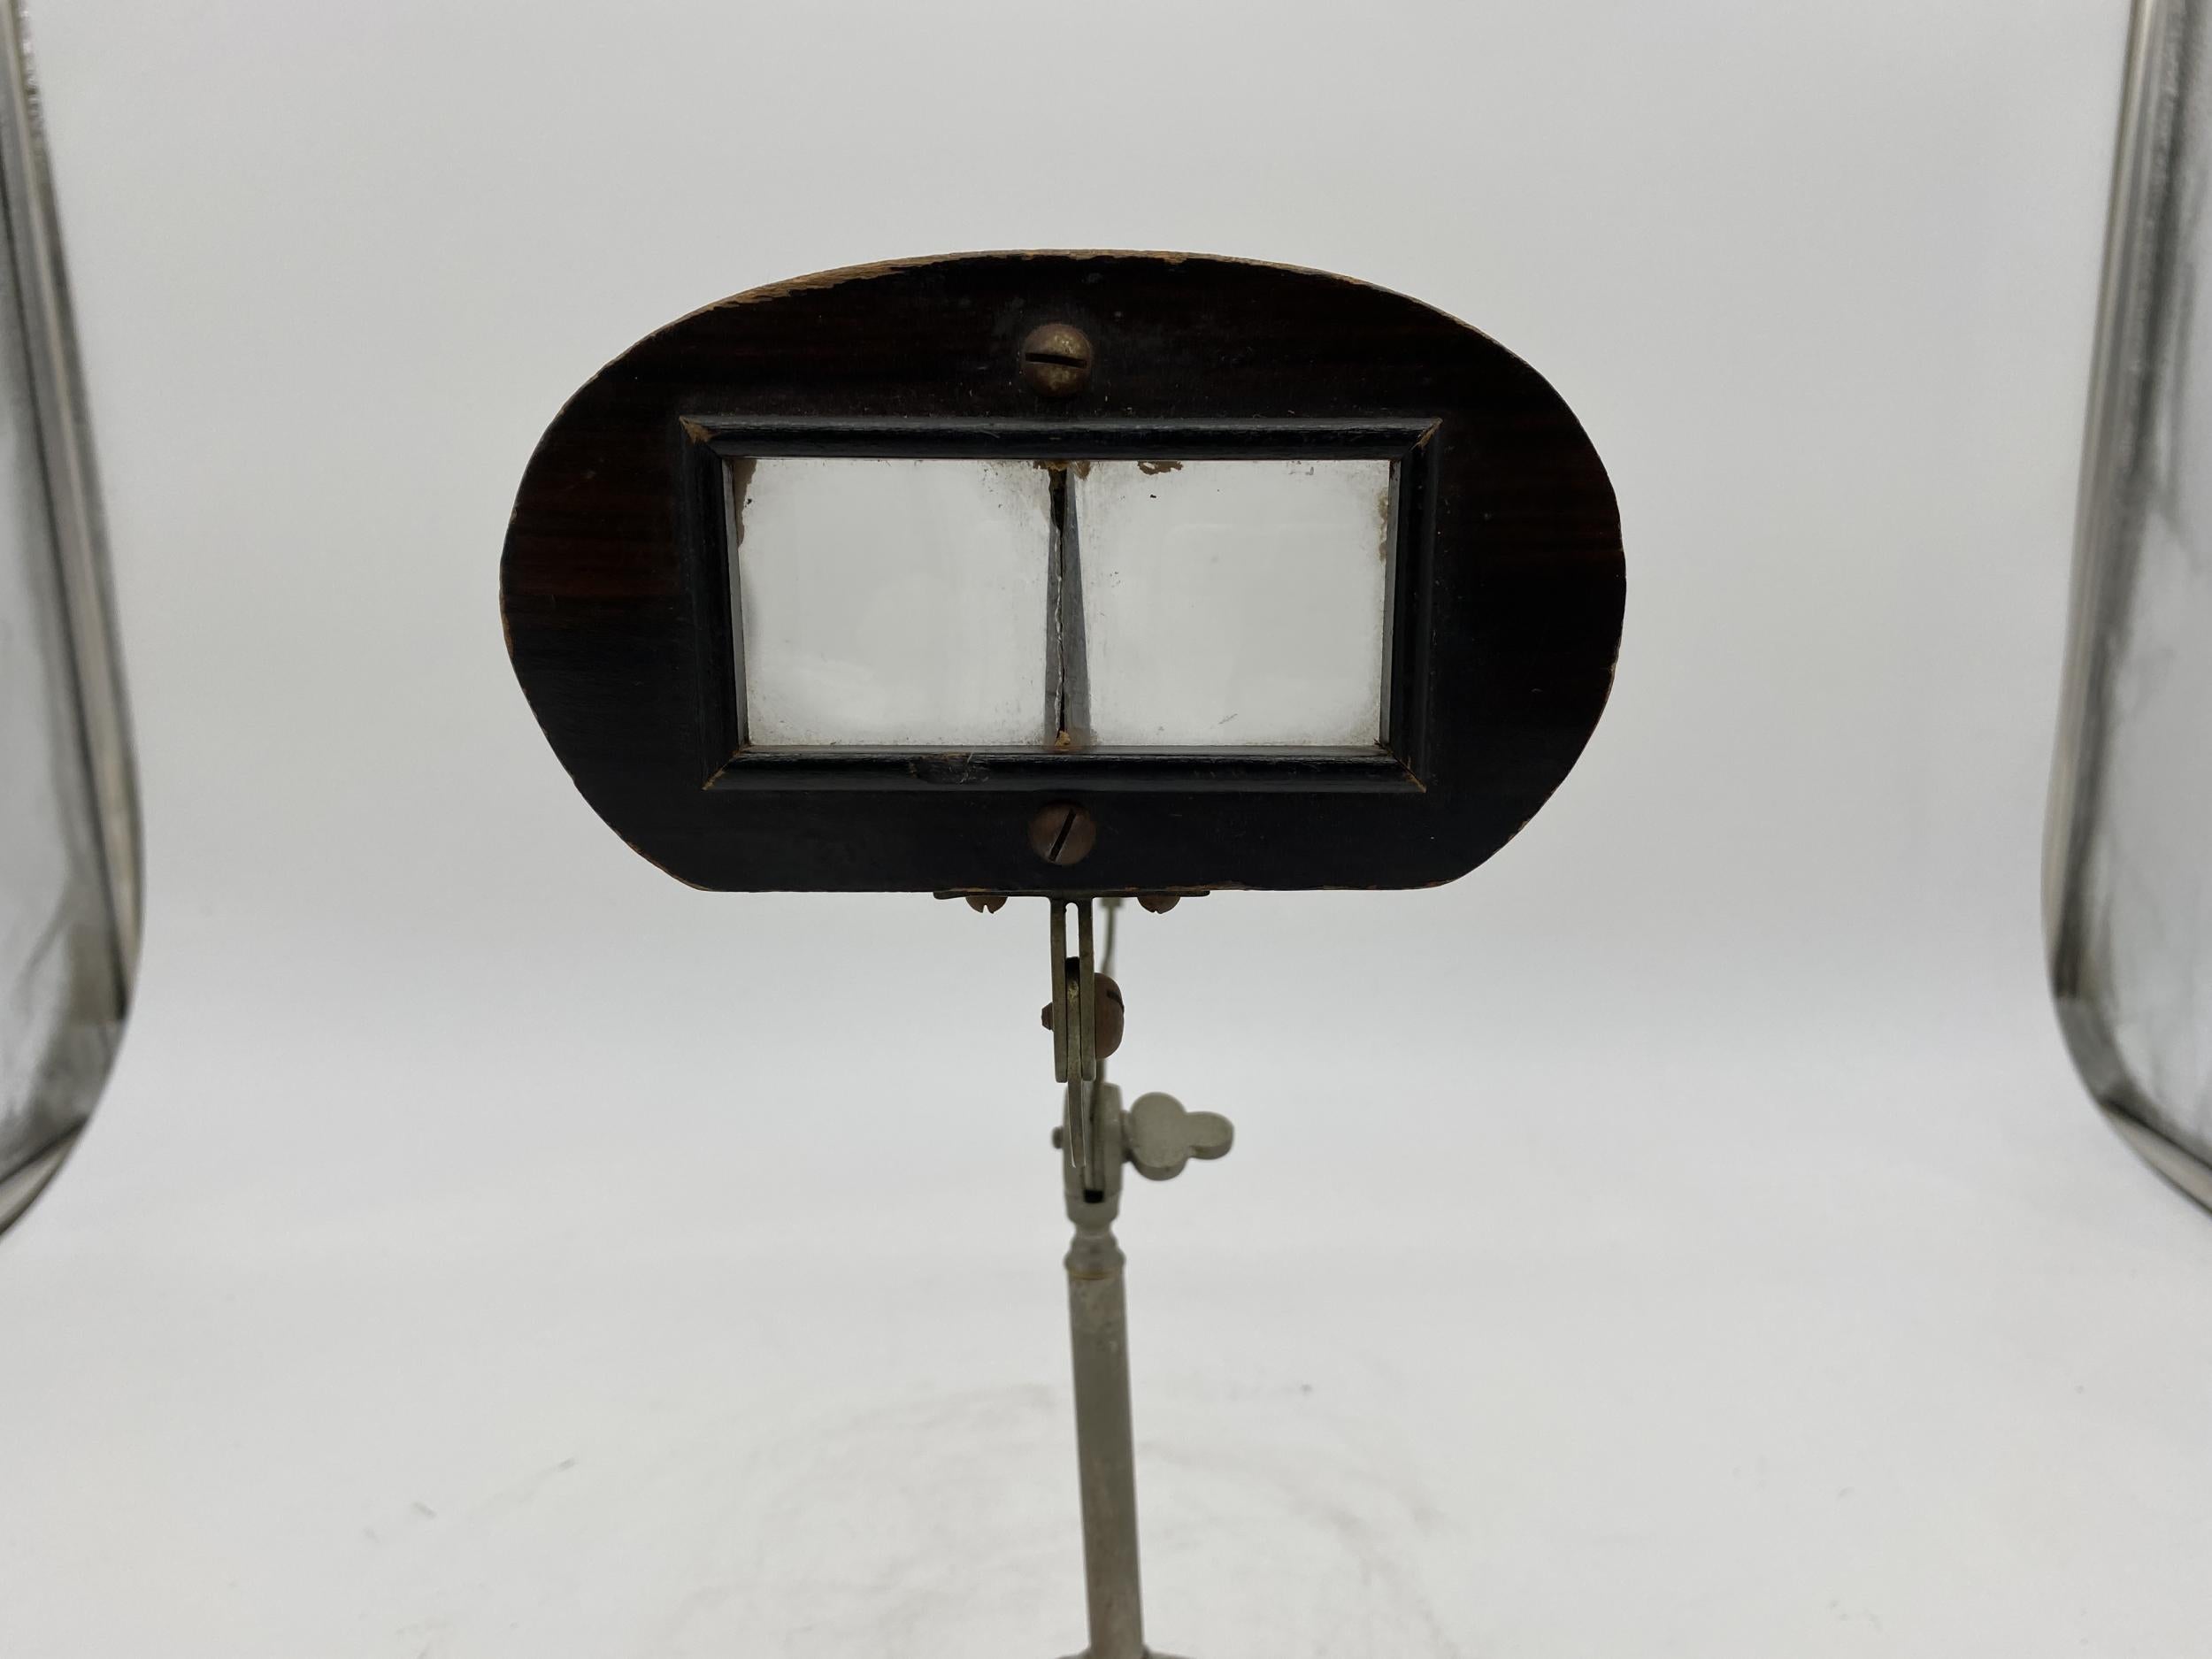 Rare Decorative Table Top Stereo-Graphoscope Stereo Viewer, circa 1889 In Excellent Condition For Sale In Van Nuys, CA